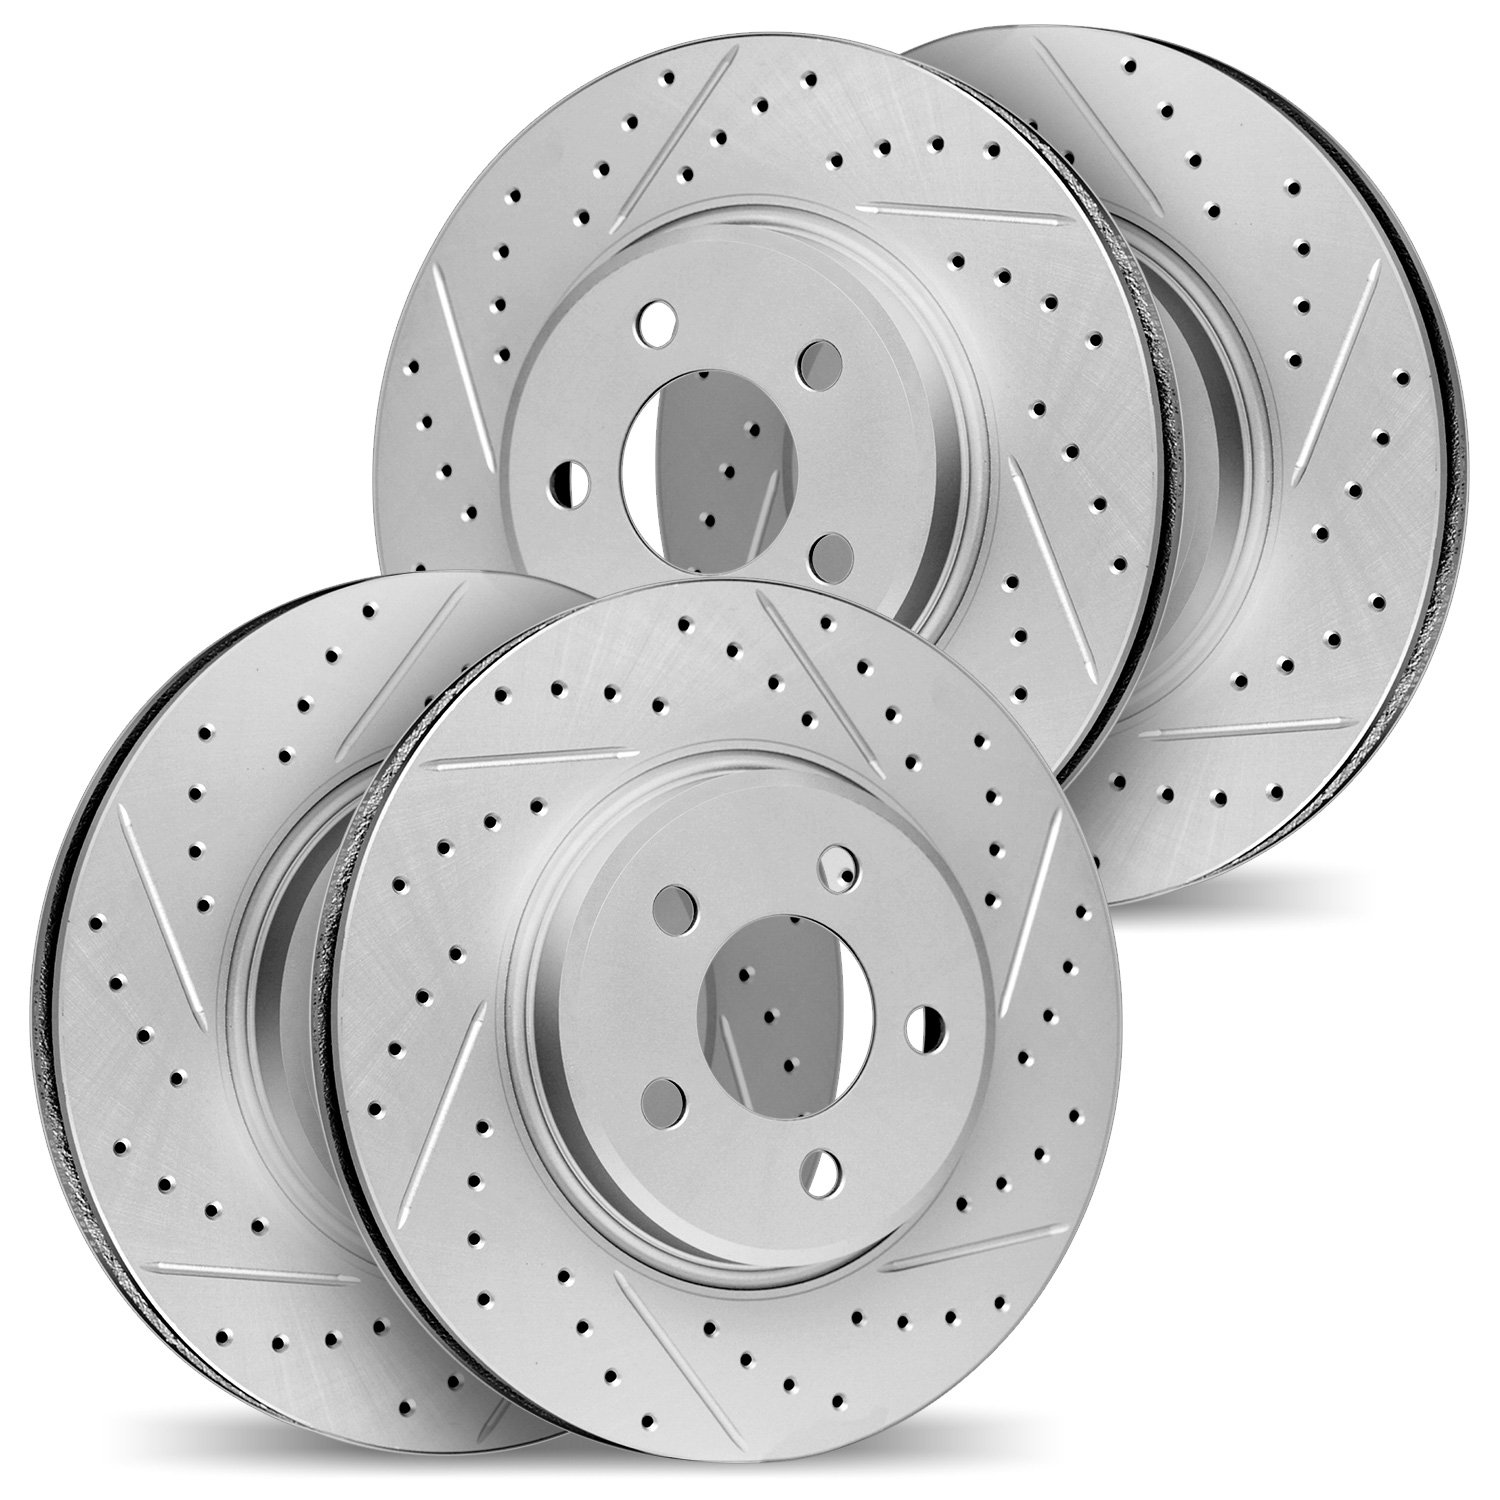 2004-65001 Geoperformance Drilled/Slotted Brake Rotors, 2003-2011 GM, Position: Front and Rear